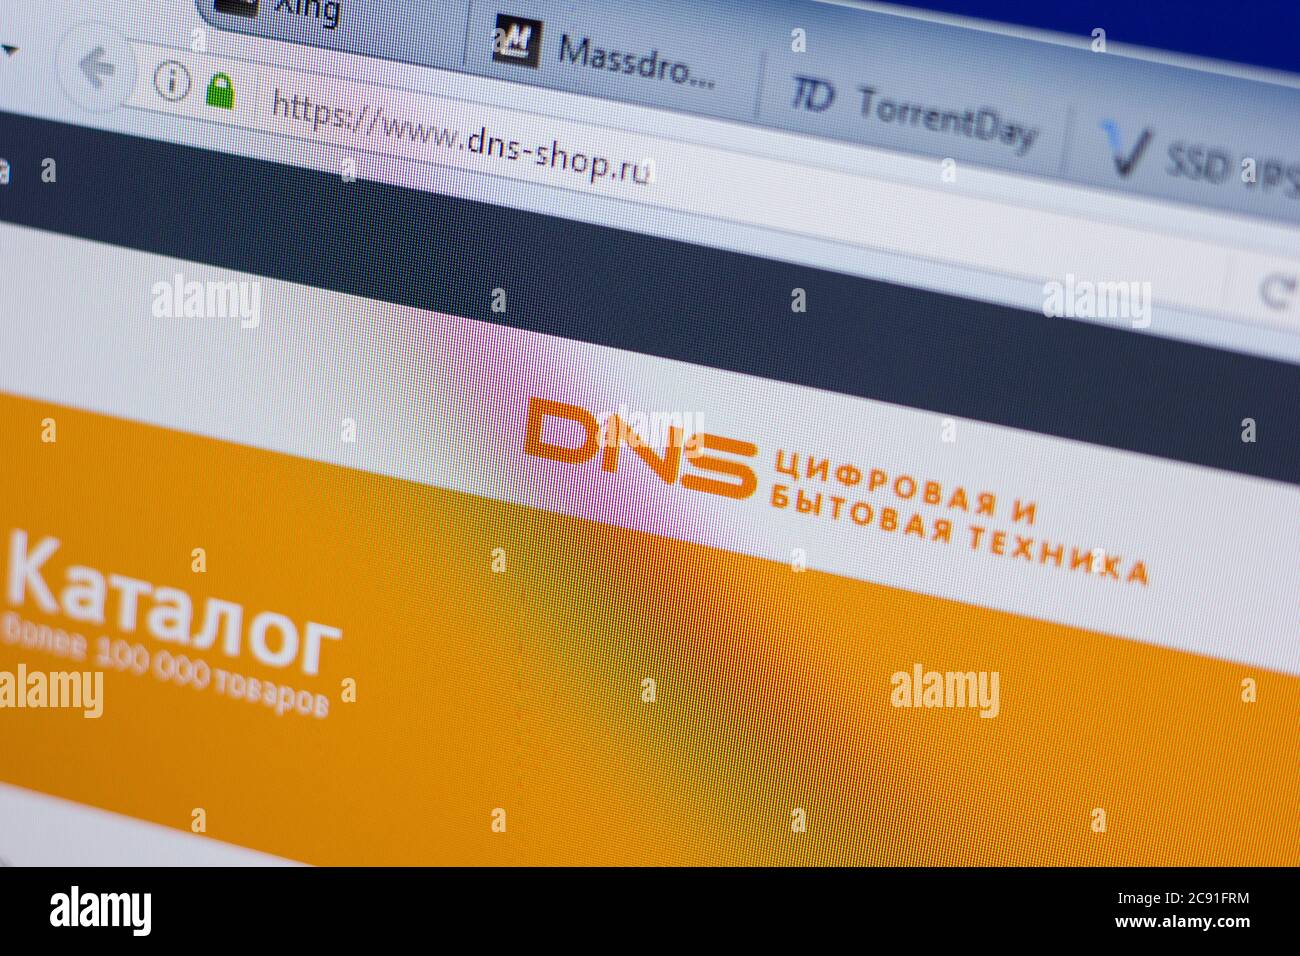 Ryazan, Russia - June 17, 2018: Homepage of Dns-Shop website on the display  of PC, url - Dns-Shop.ru Stock Photo - Alamy